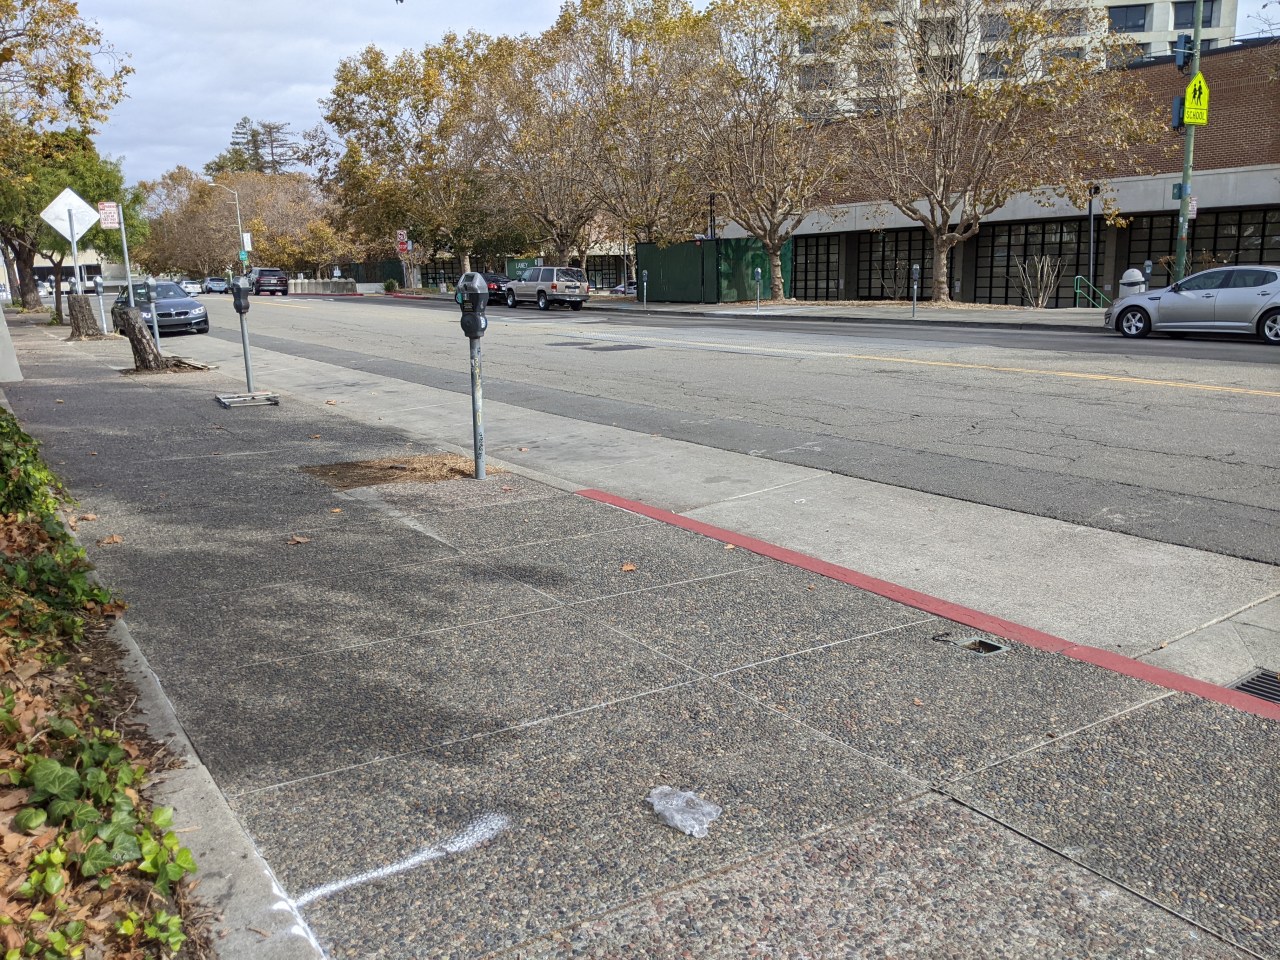 Actually, there was plenty of legal street parking, and there were spots in the BART surface lot